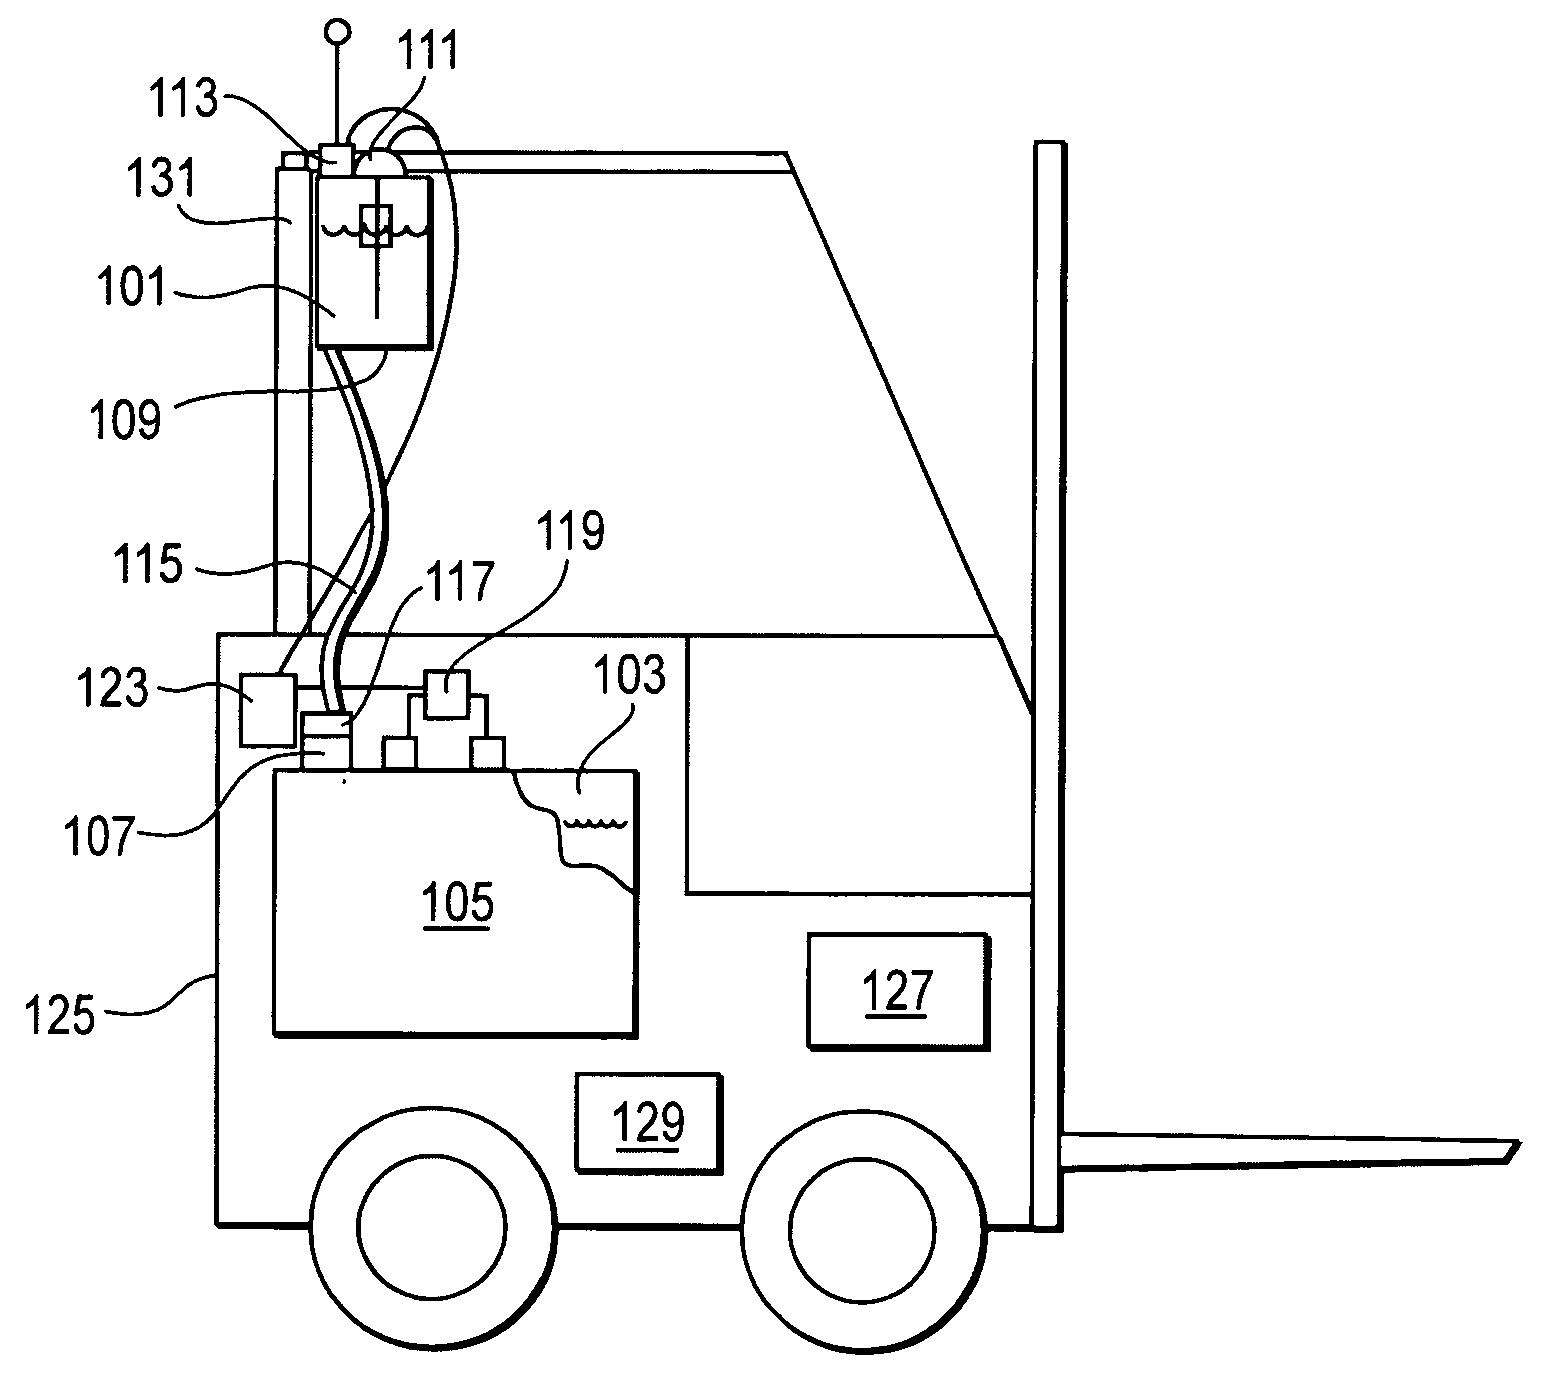 Battery electrolyte level control system